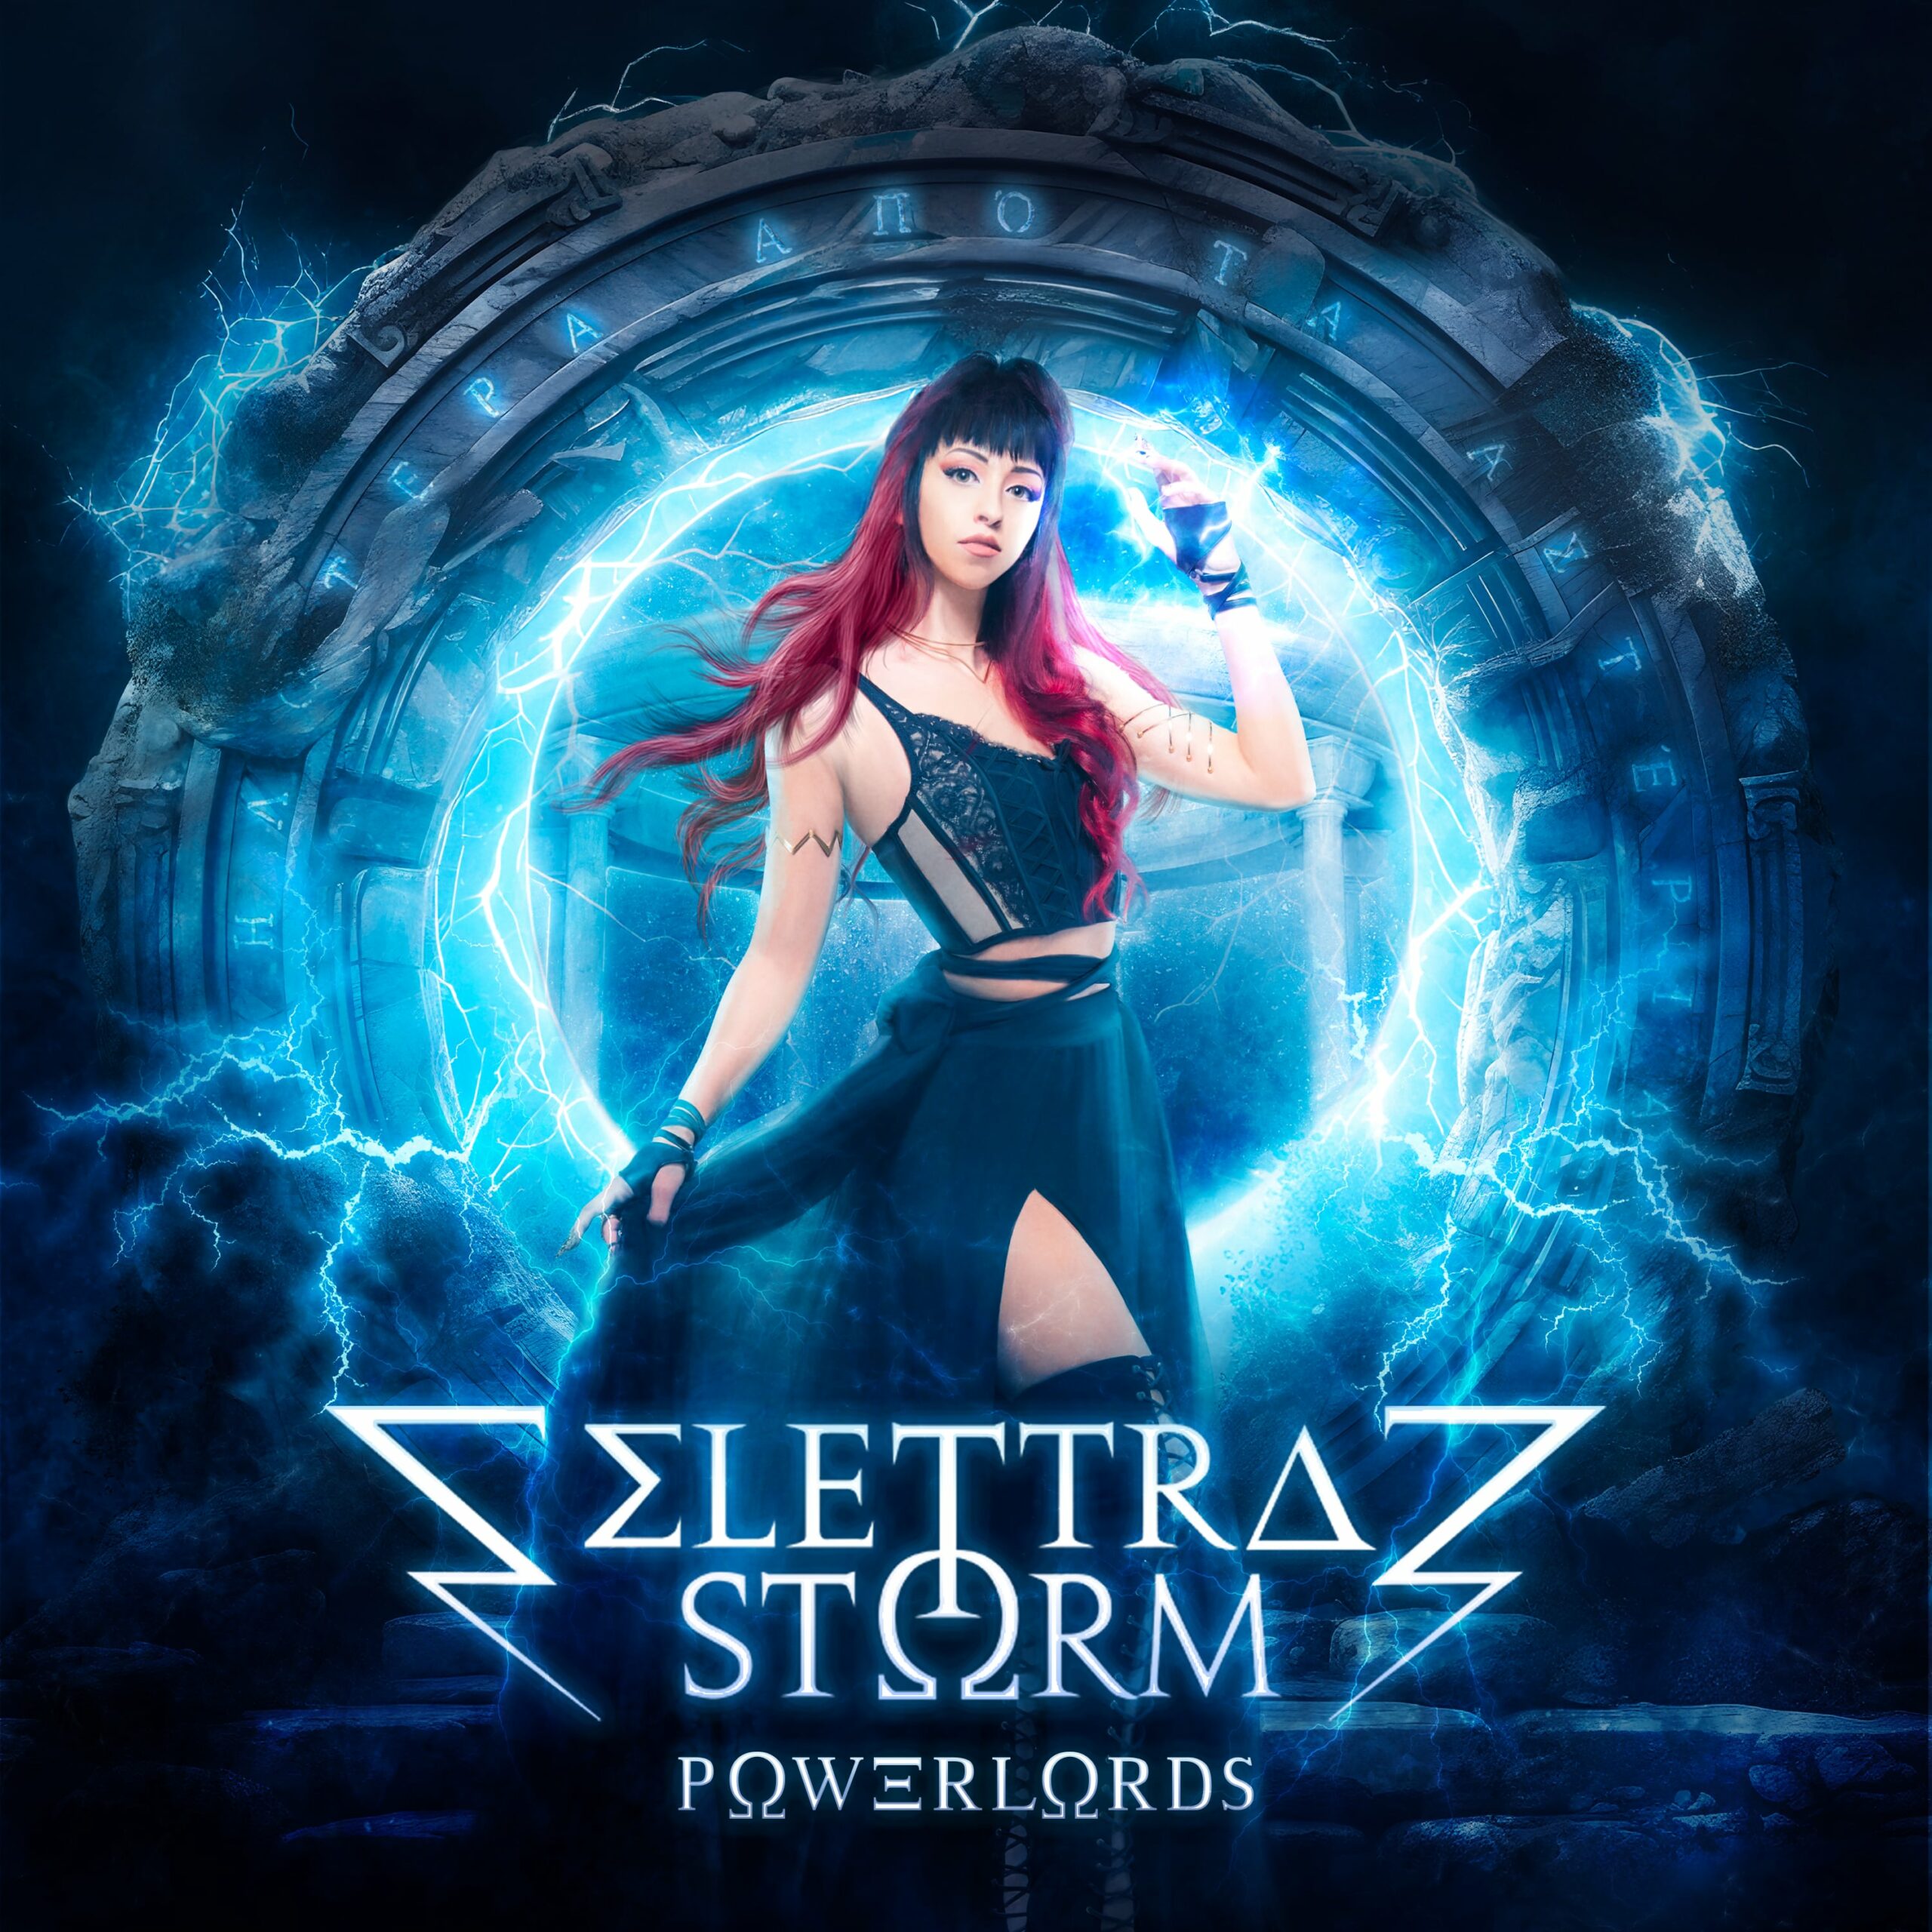 Elettra Storm releases “Sacrifice Of Angels” video – “Powerlords” vinyl version out in June